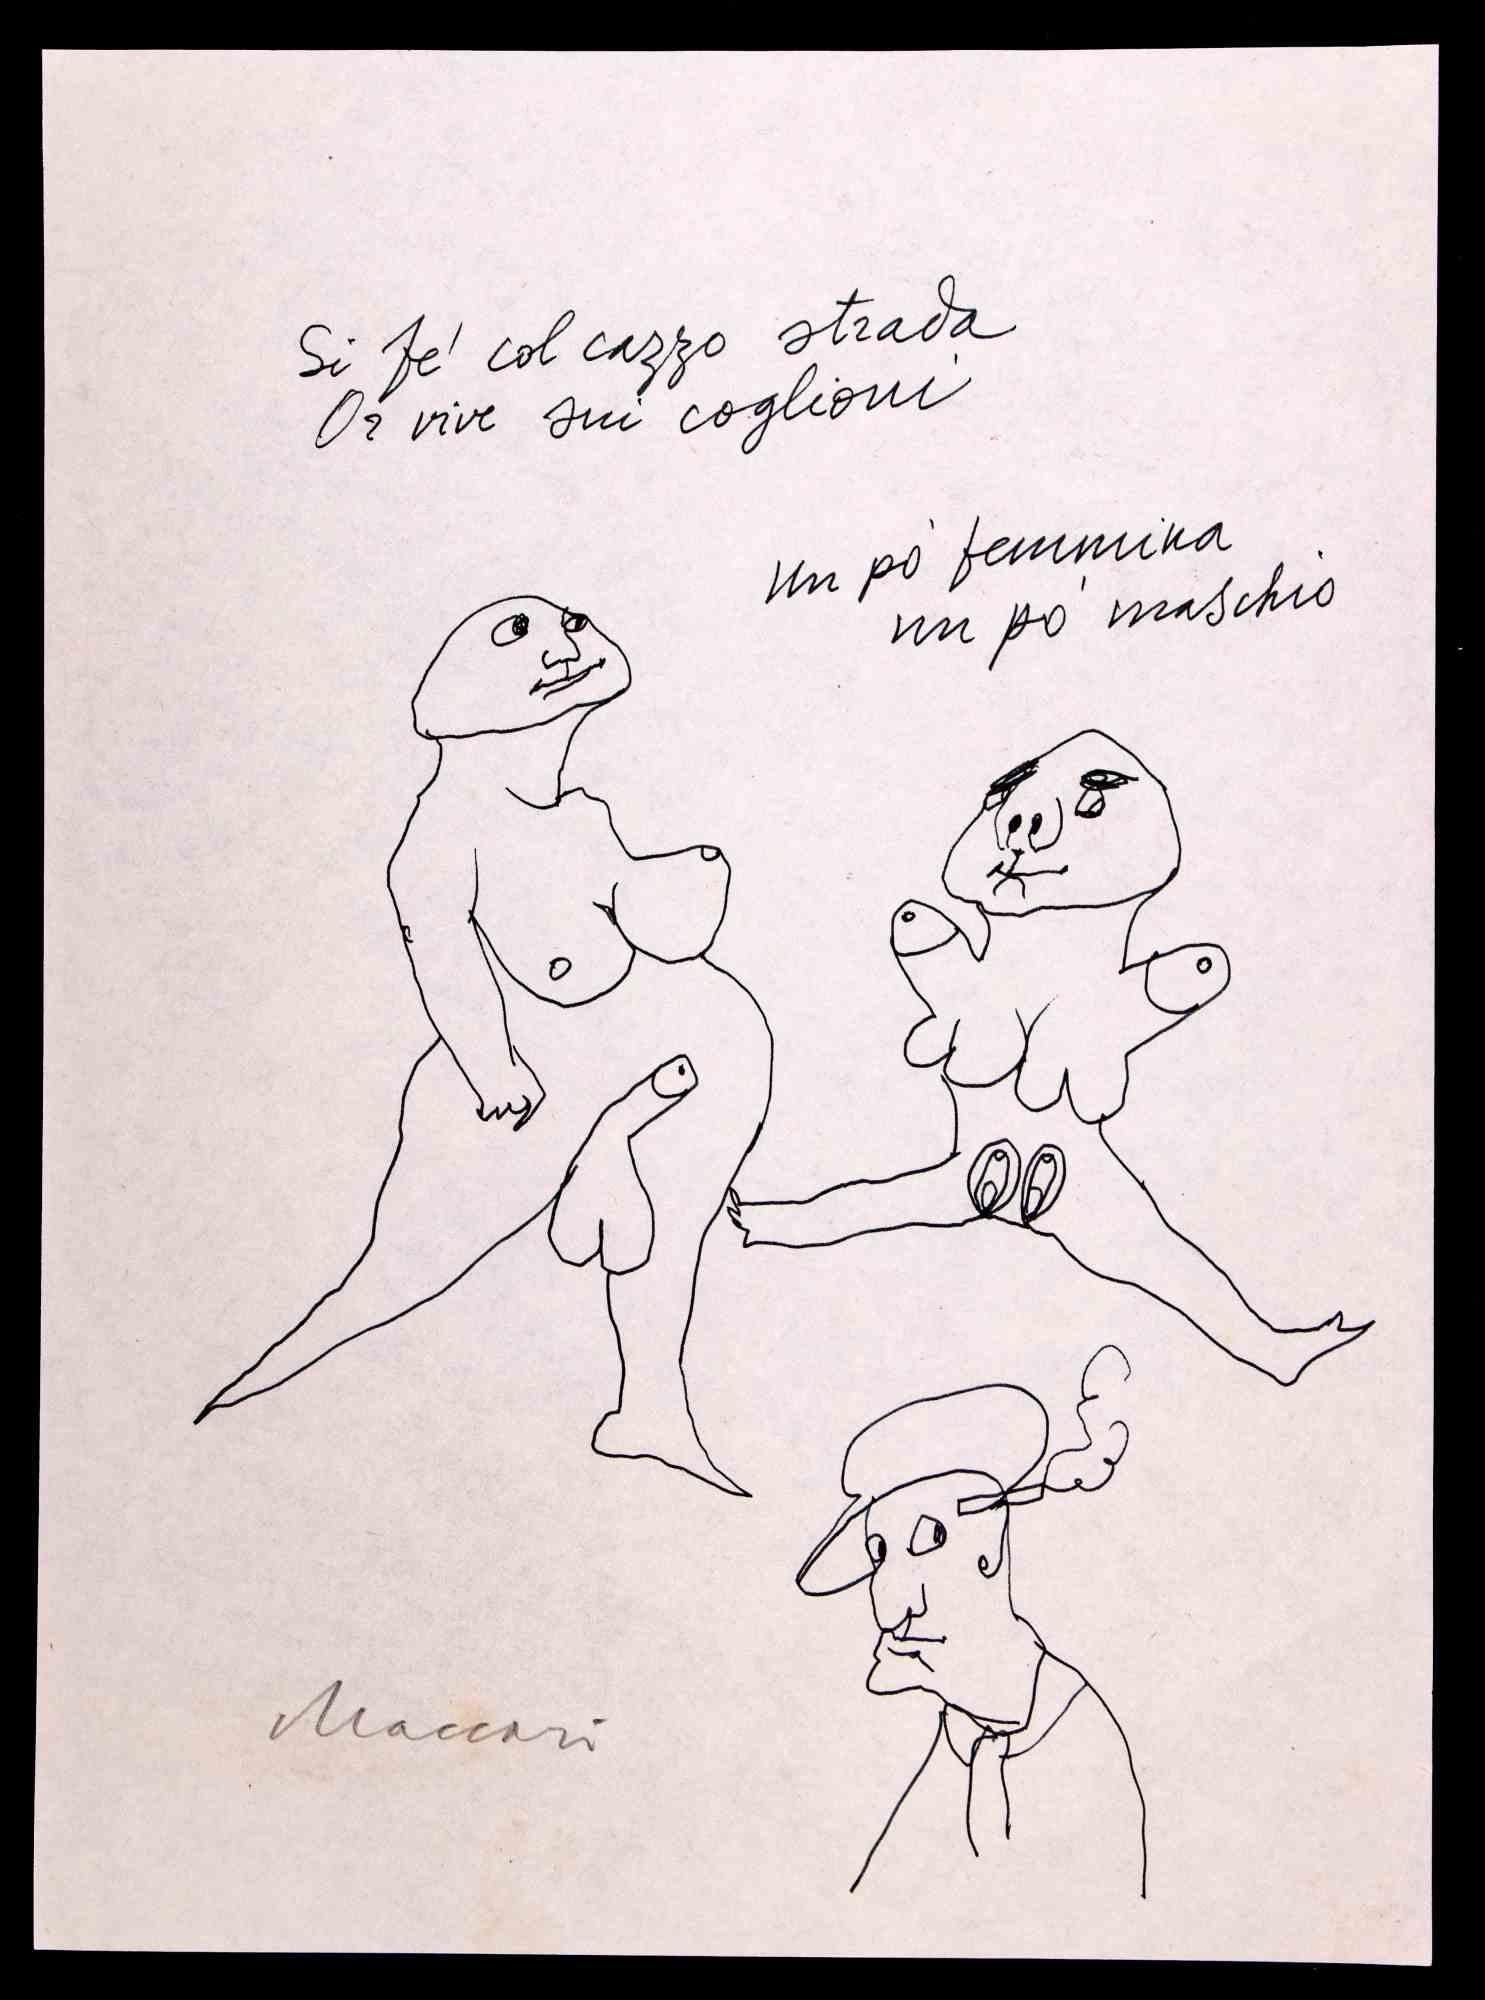 Erotic Figures is a Pen Drawing realized by Mino Maccari in 1970.

Hand-signed on the lower margin.

Good condition on a white paper.

Mino Maccari (Siena, 1924-Rome, June 16, 1989) was an Italian writer, painter, engraver and journalist, winner of